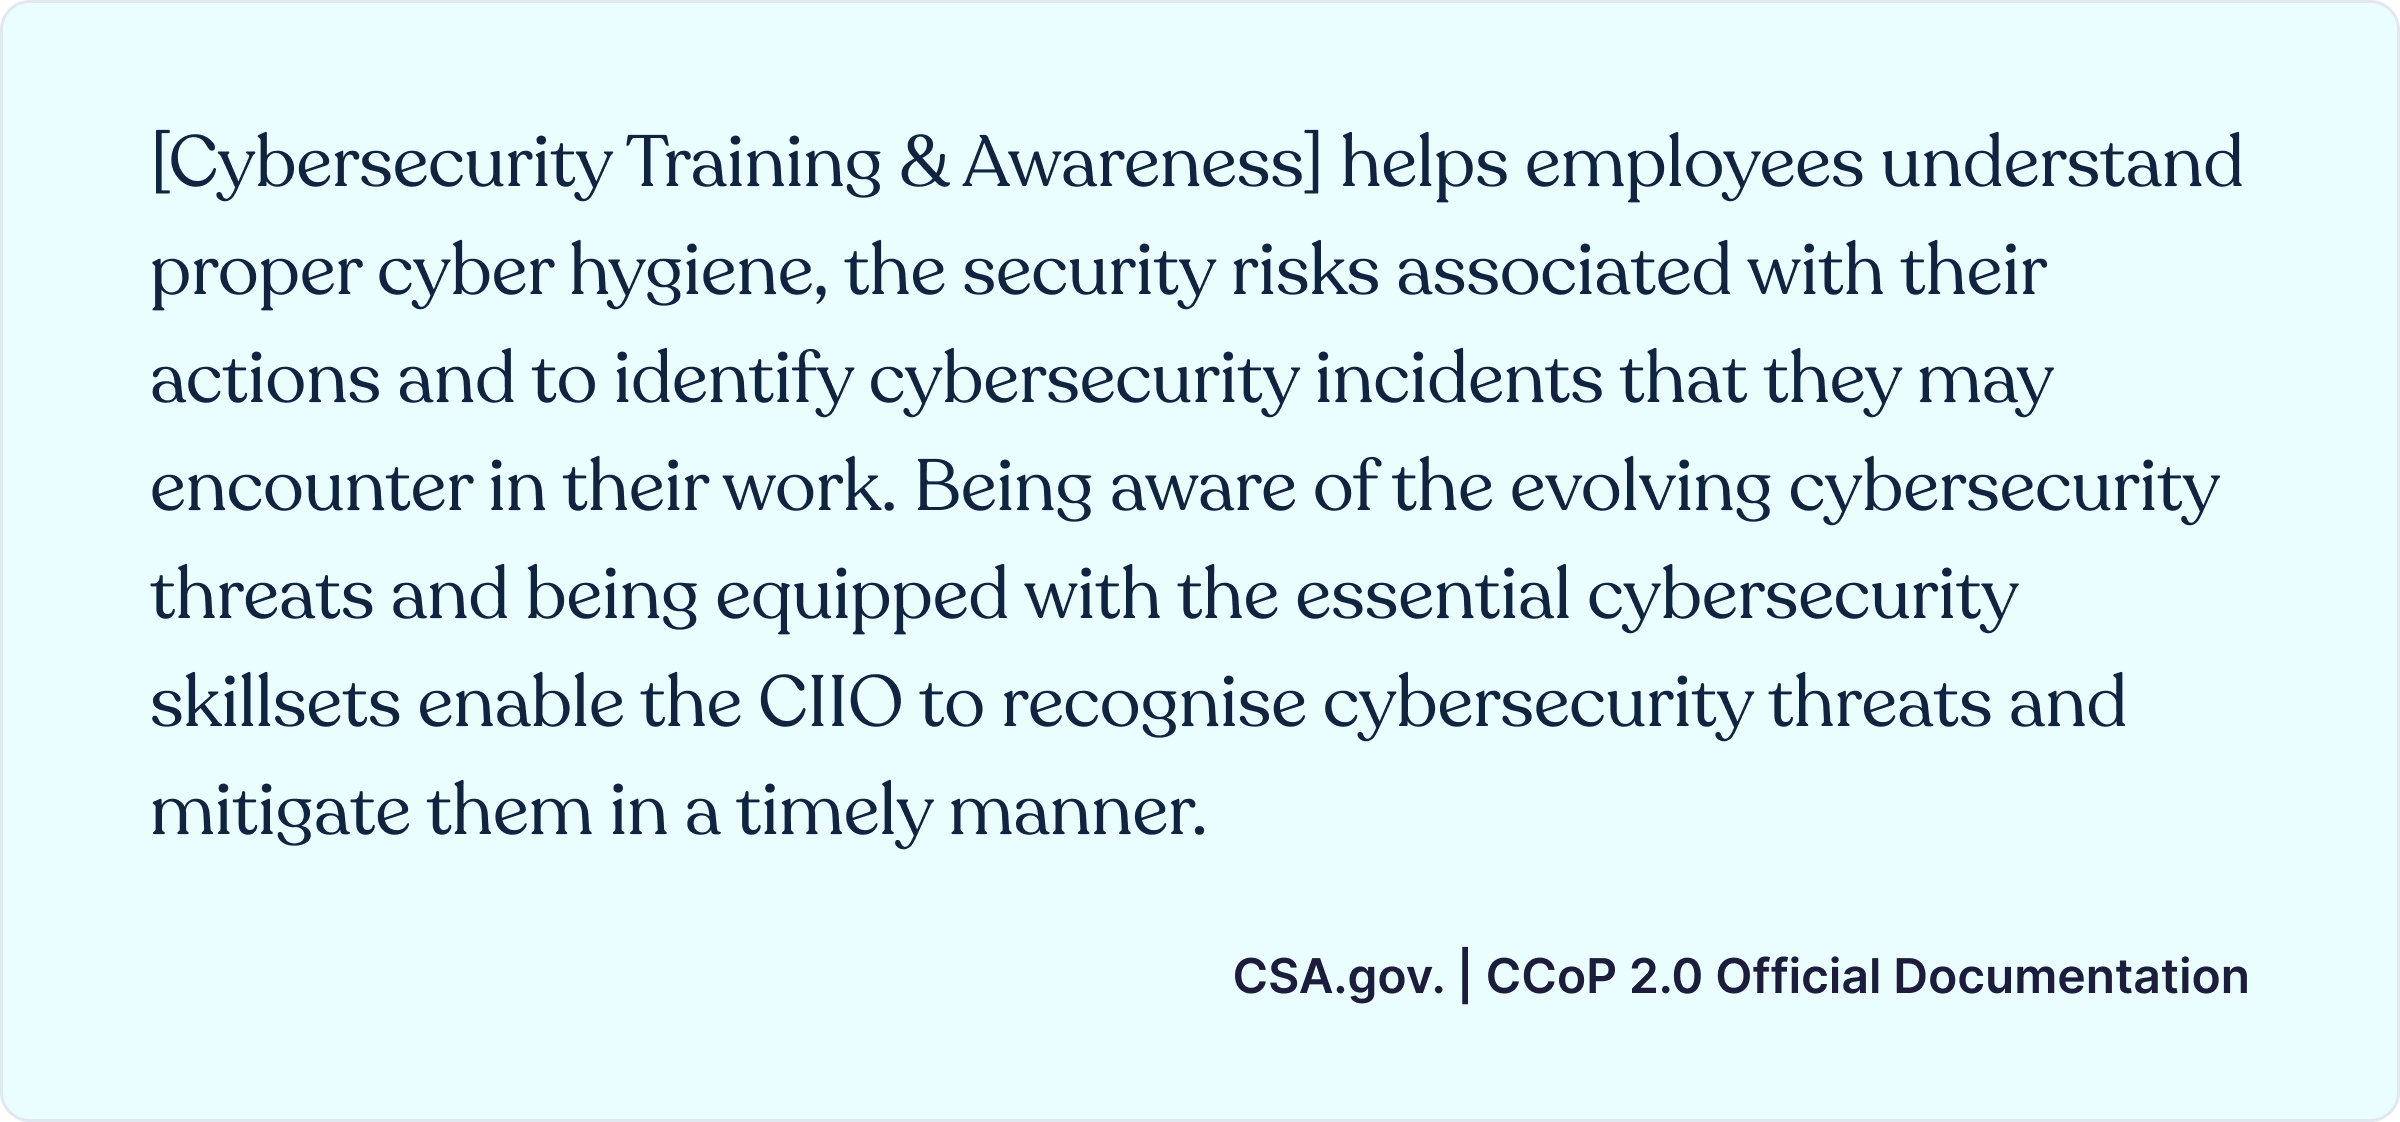 Cybersecurity Training & Awareness - CSA.gov. CCoP 2.0 Official Documentation